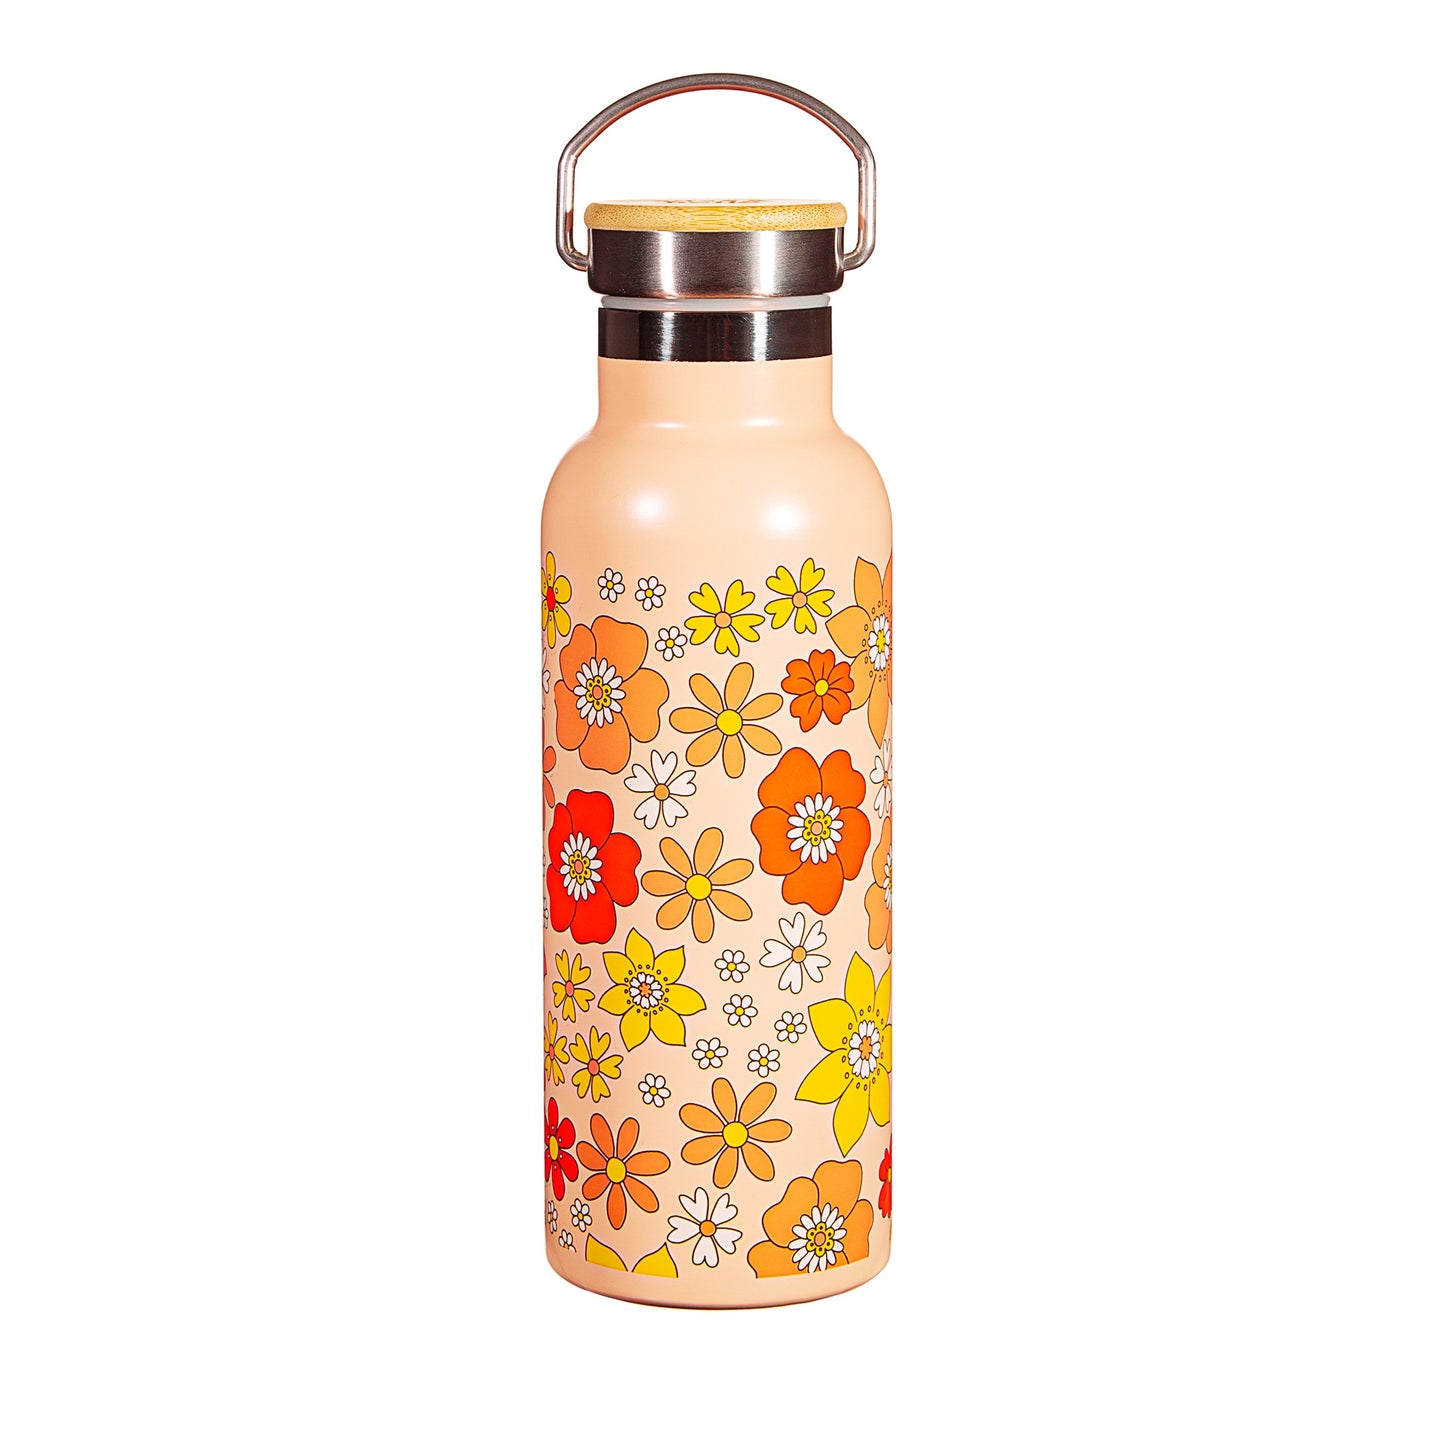 70s style floral drinks bottle